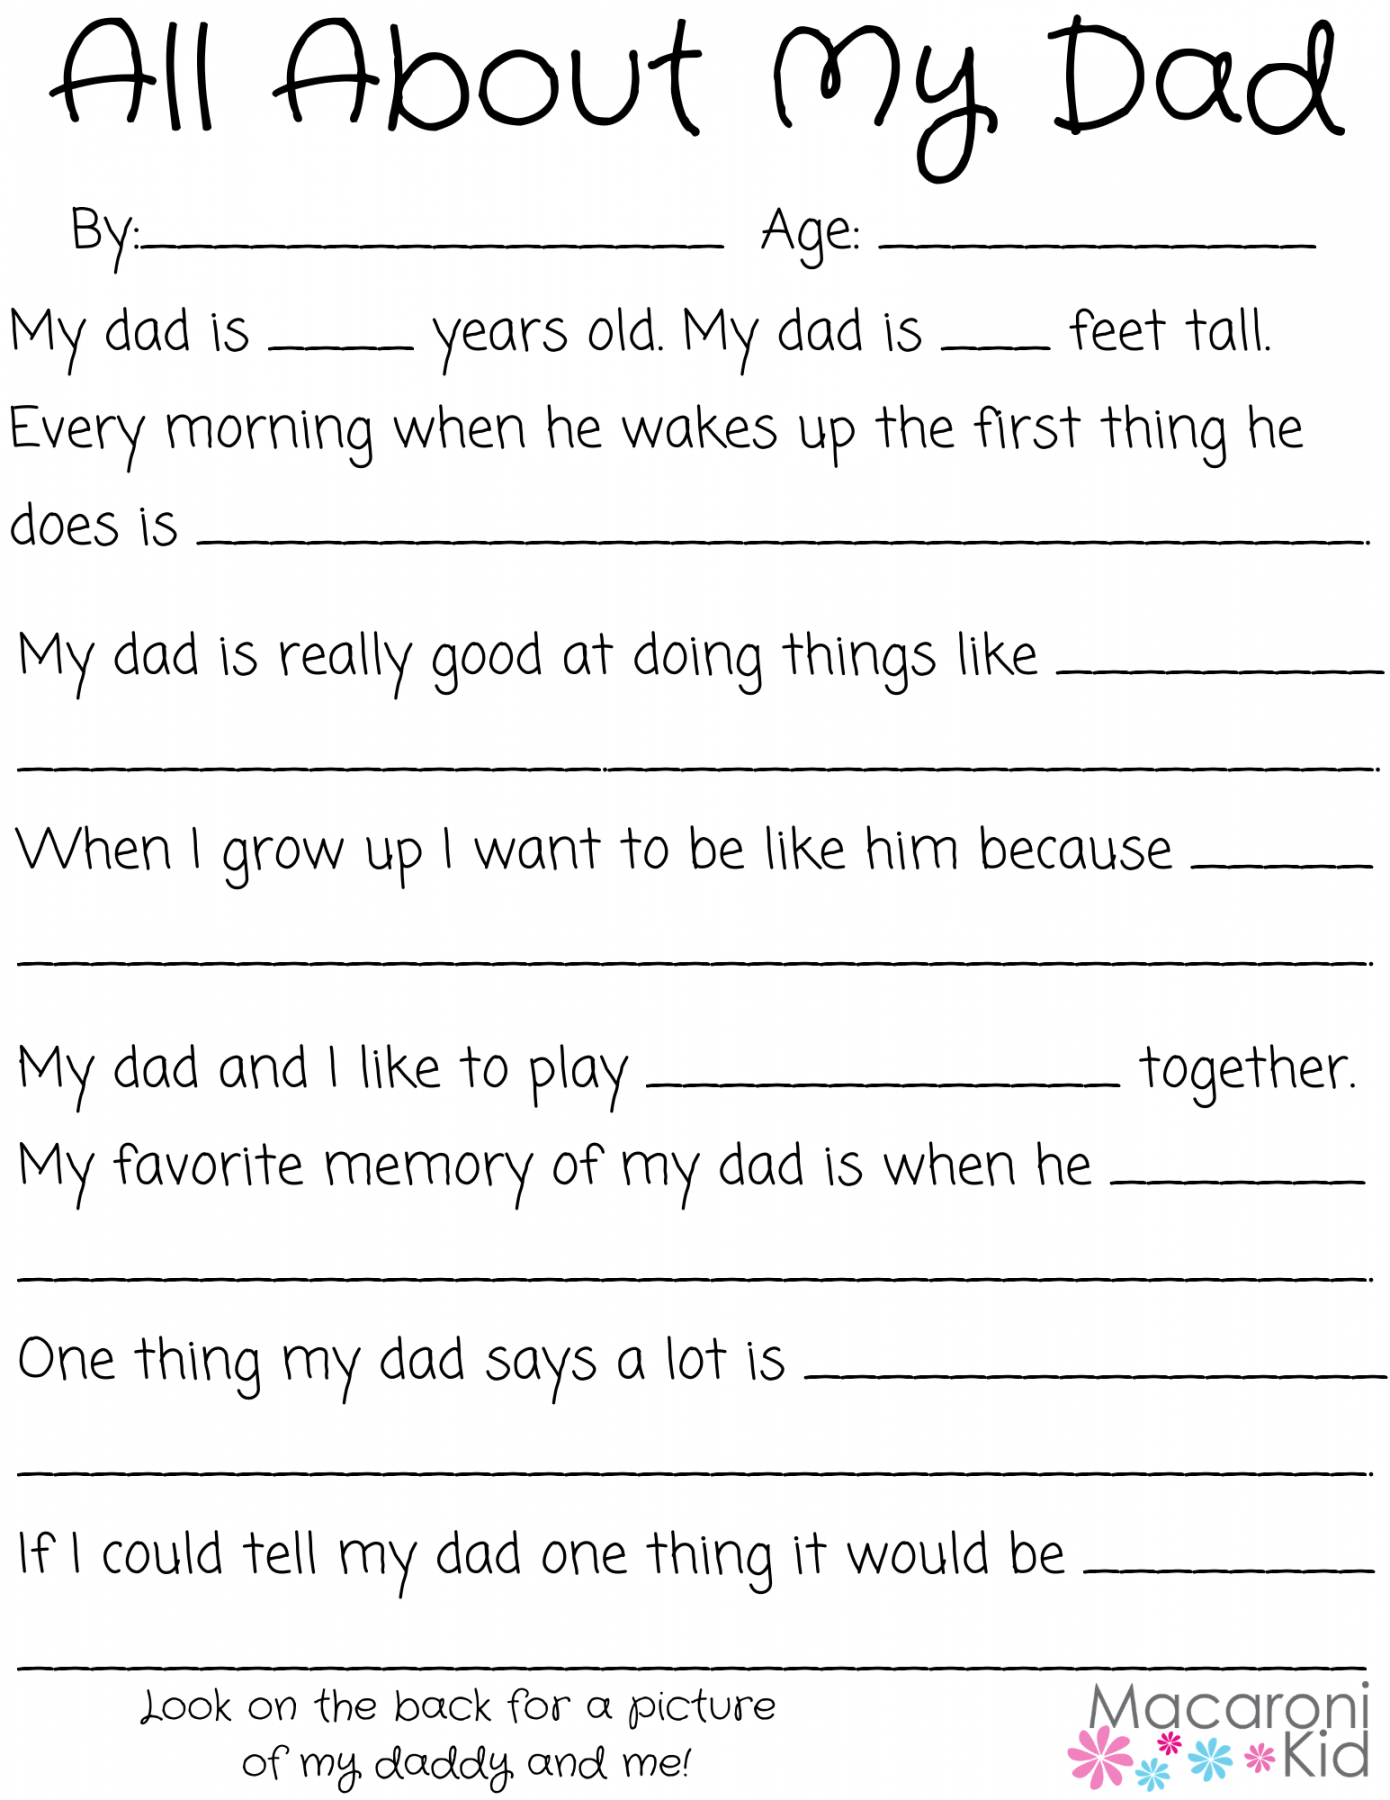 All About My Dad Free Printable - Printable - All About My Dad: A Father